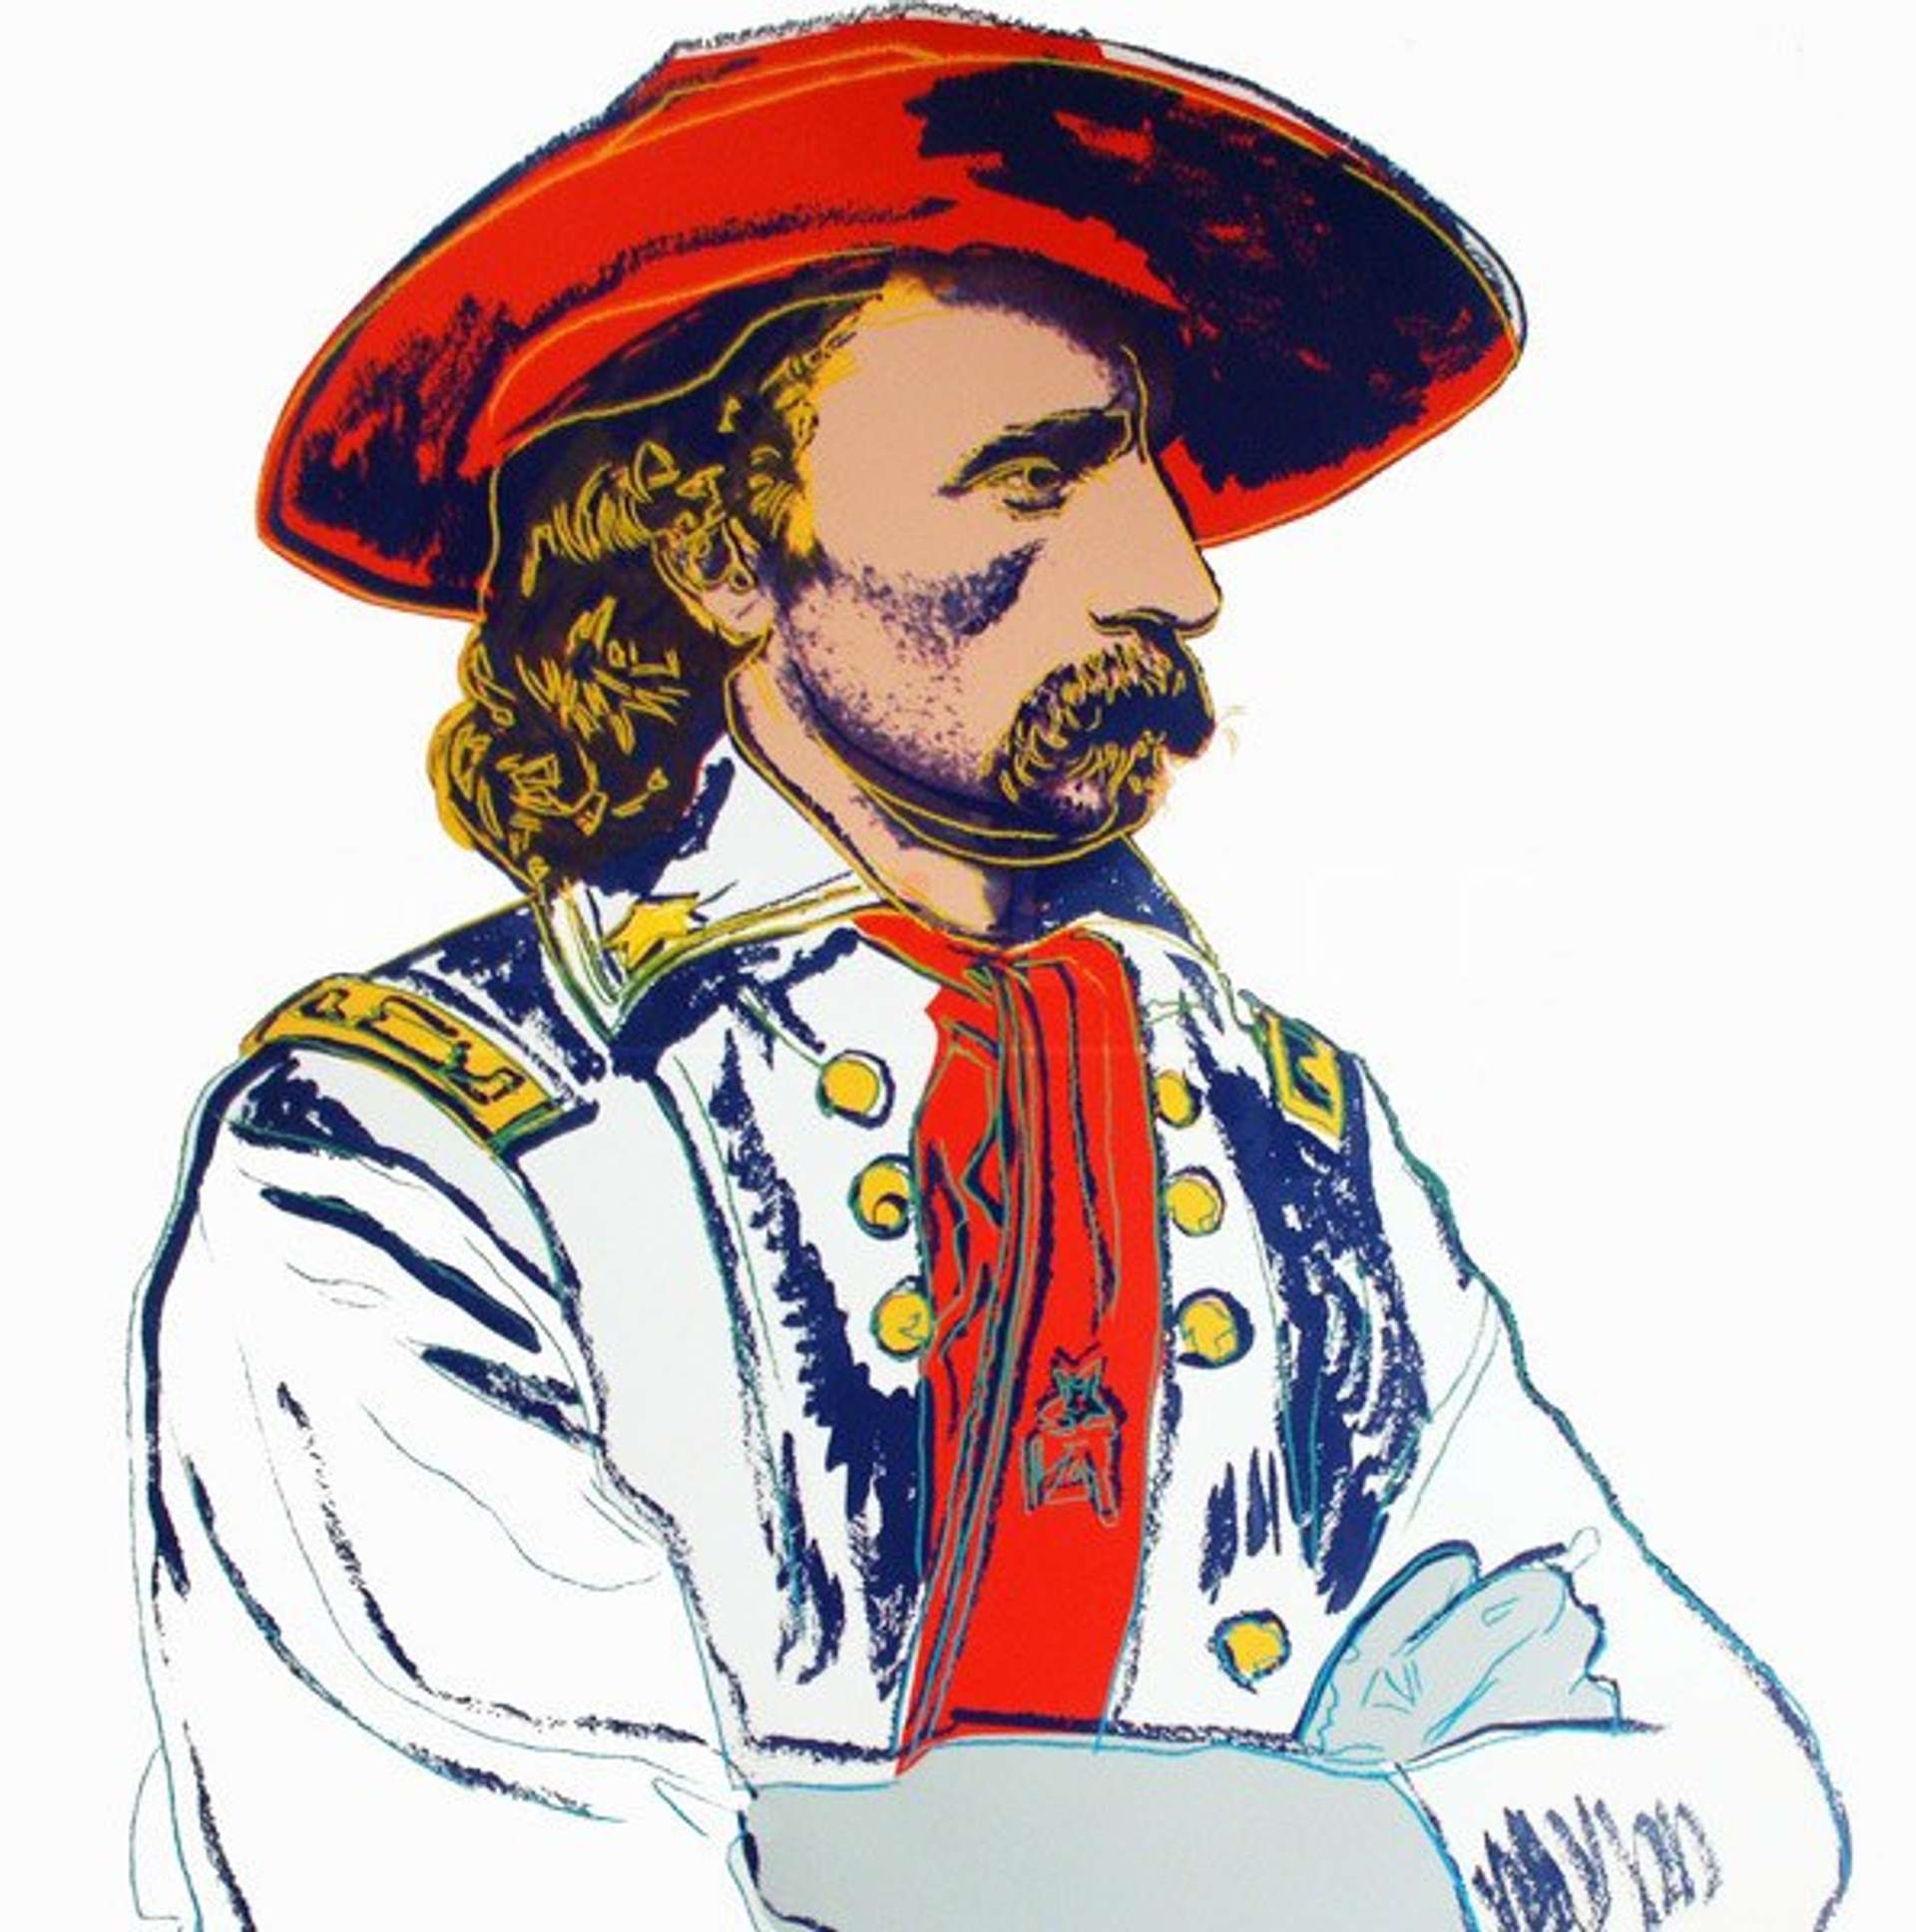 General Custer (F. & S. II.379) by Andy Warhol